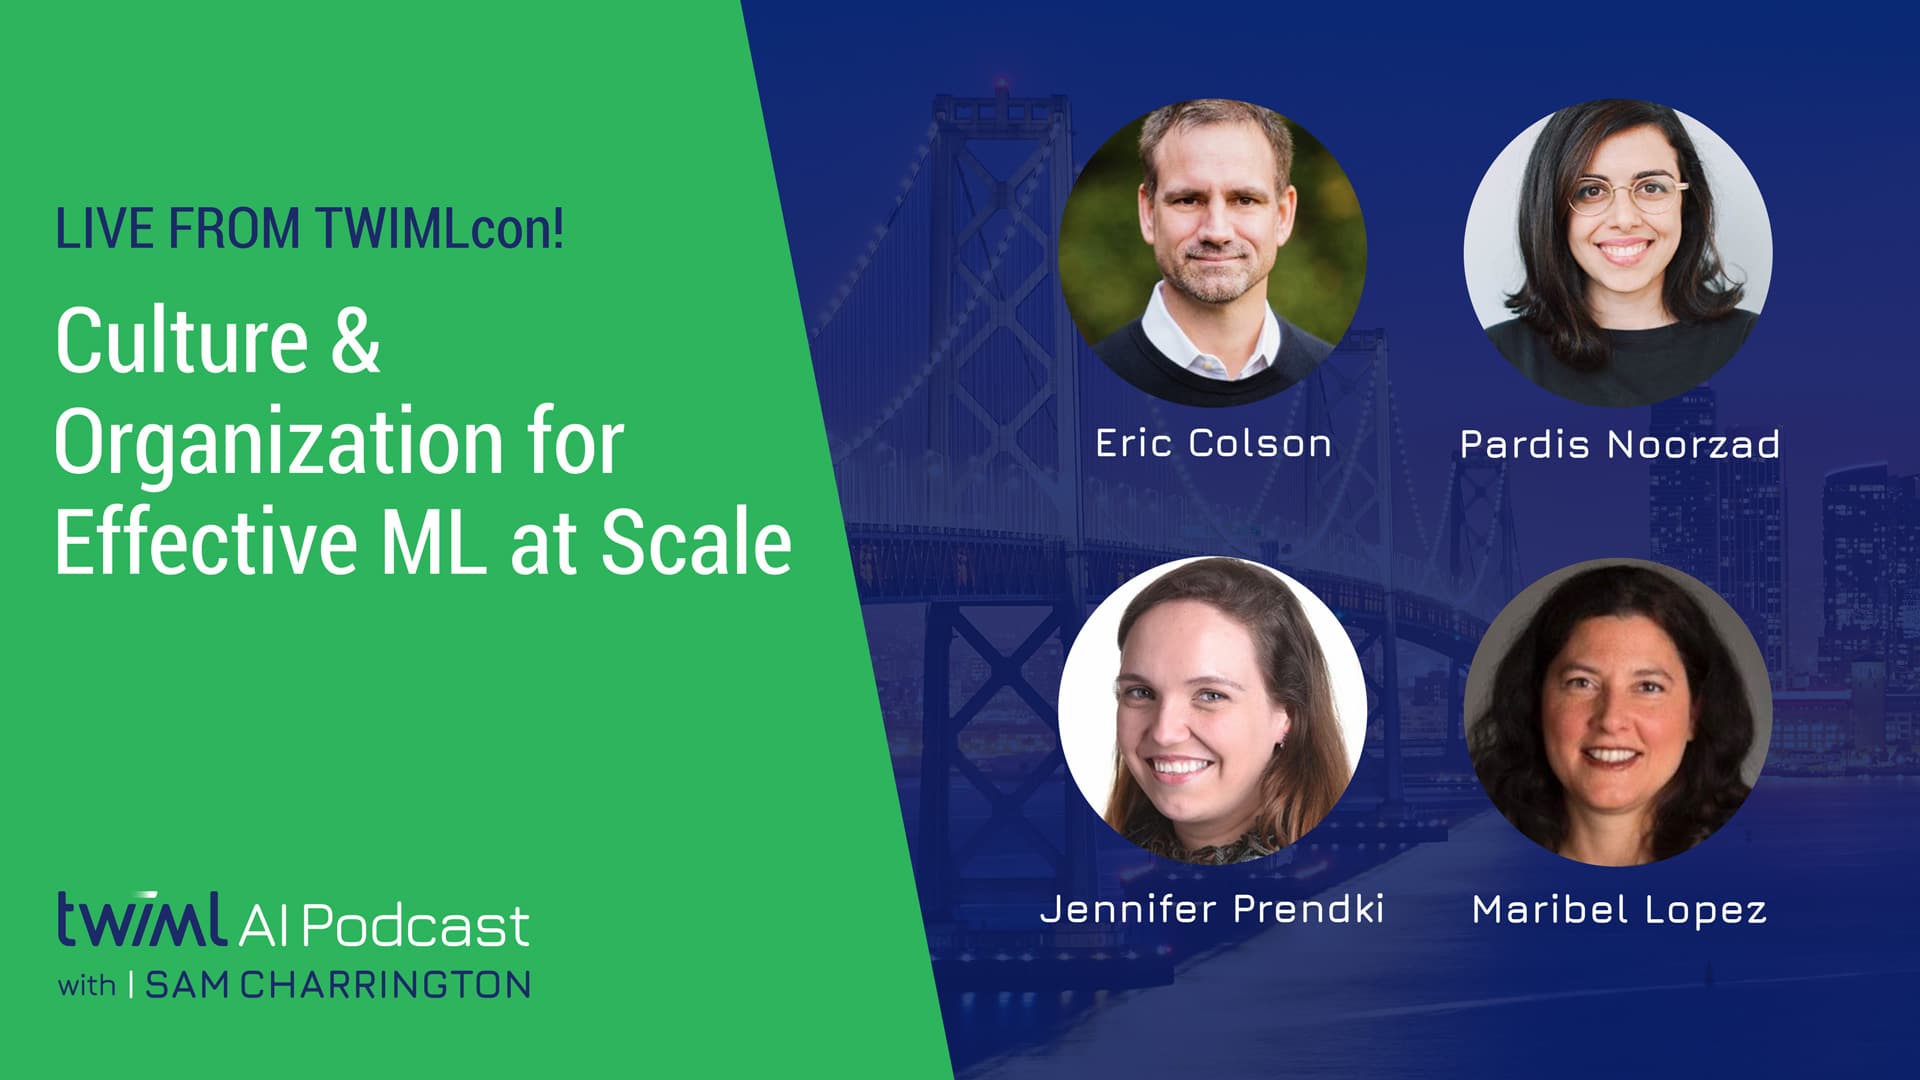 Banner Image: Live from TWIMLcon! Culture & Organization for Effective ML at Scale - Podcast Discussion